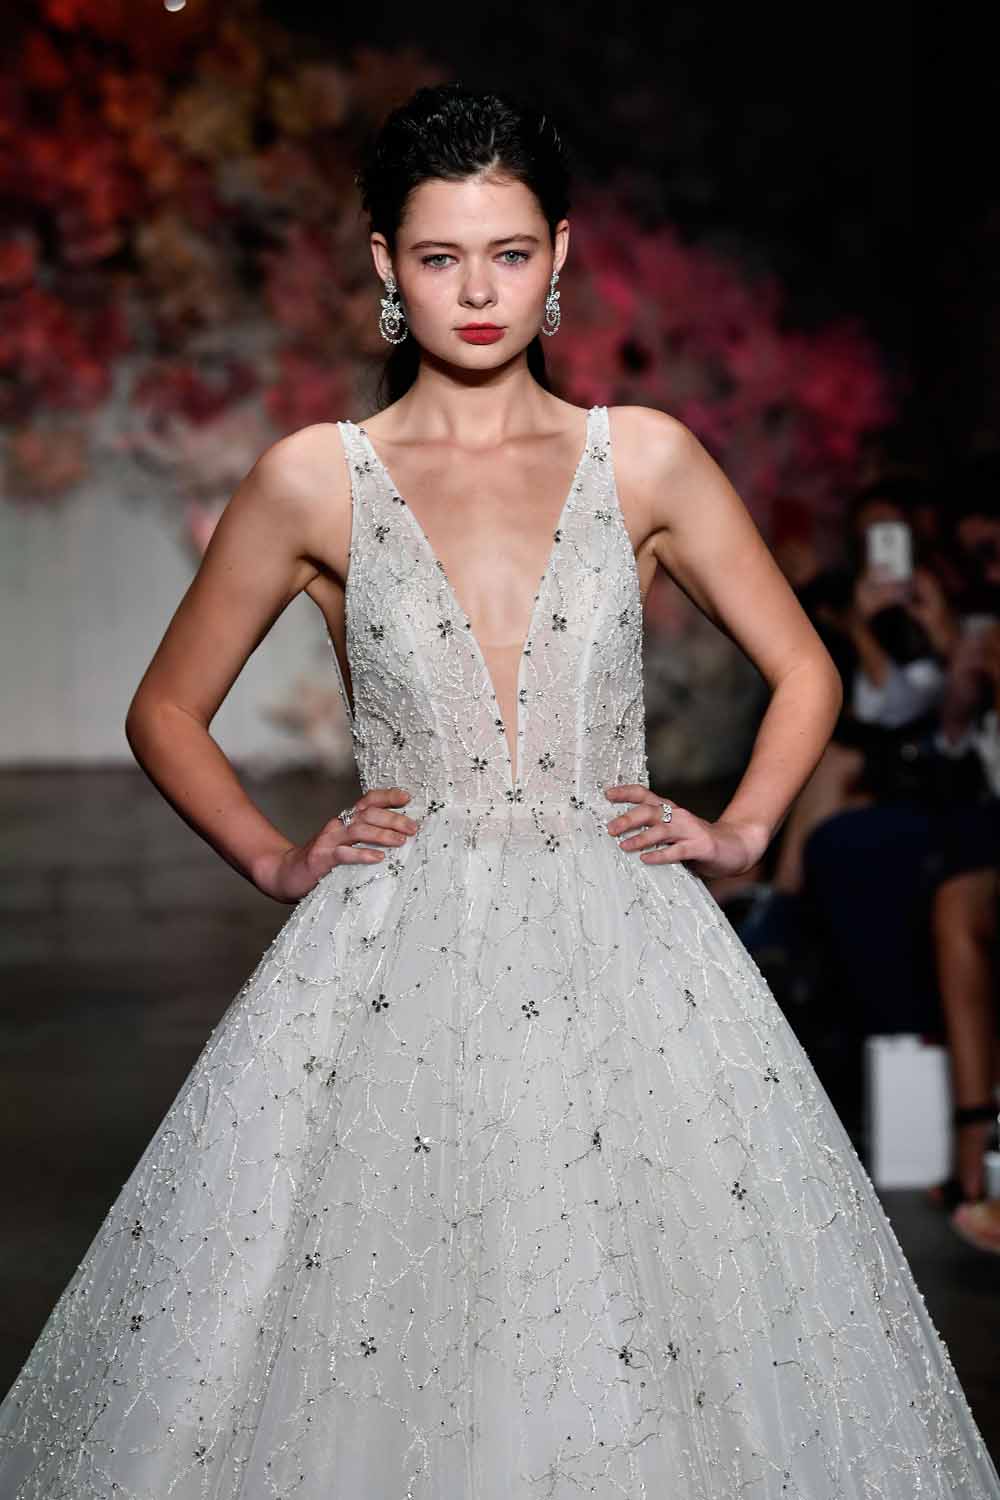 SYDNEY, AUSTRALIA - MAY 15: A model walks the runway during the Steven Khalil show at Mercedes-Benz Fashion Week Resort 18 Collections at Elston Room on May 15, 2017 in Sydney, Australia. (Photo by Stefan Gosatti/Getty Images)